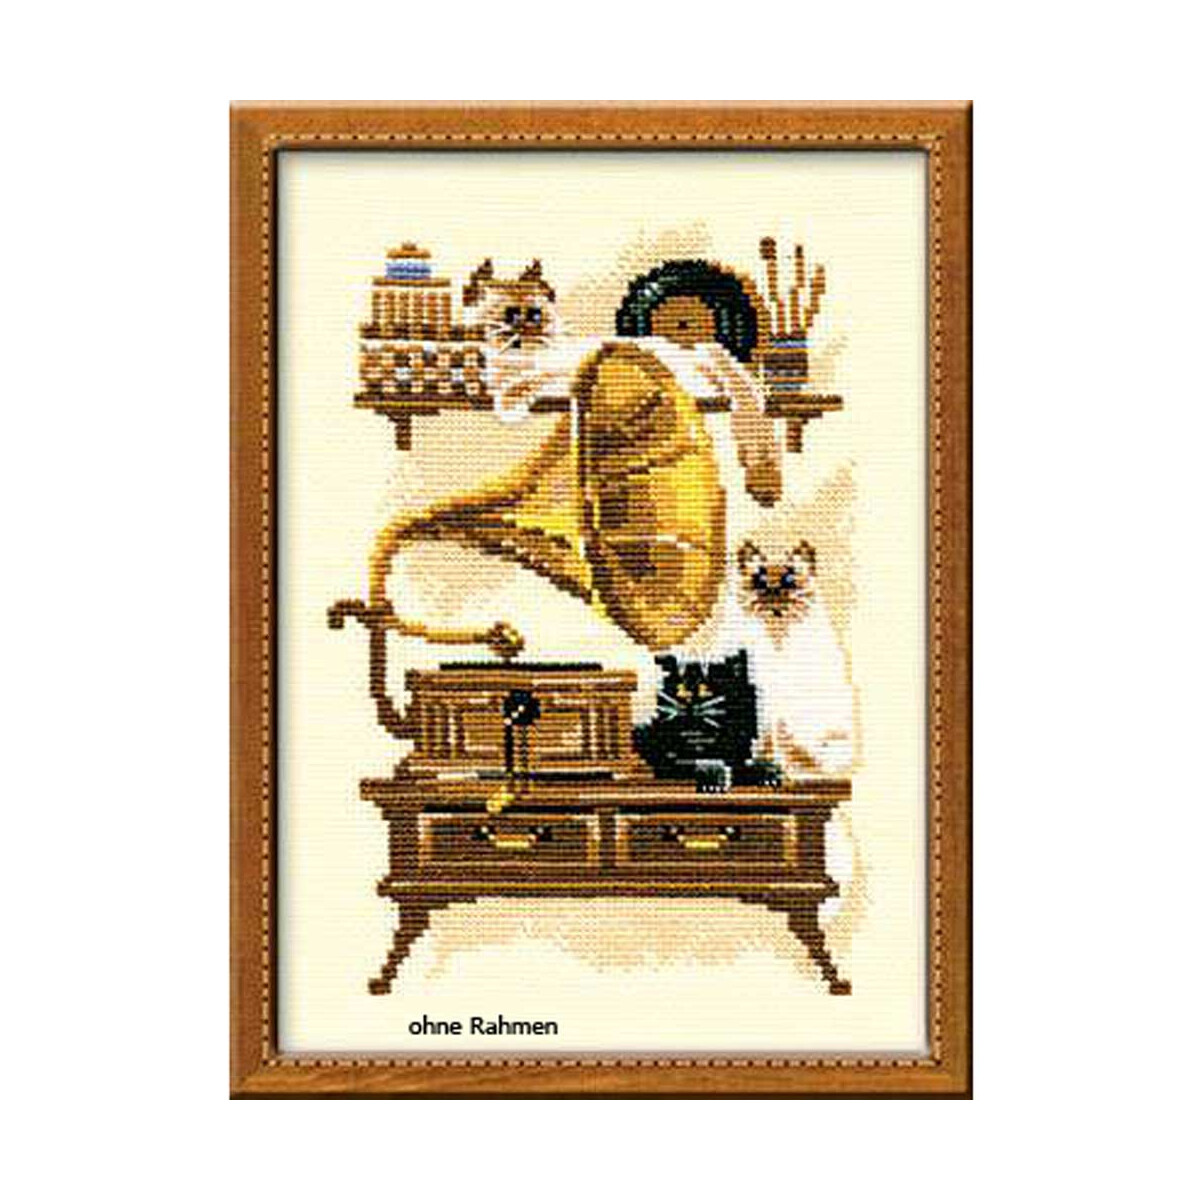 Riolis counted cross stitch Kit Cat with Gramaphone, DIY